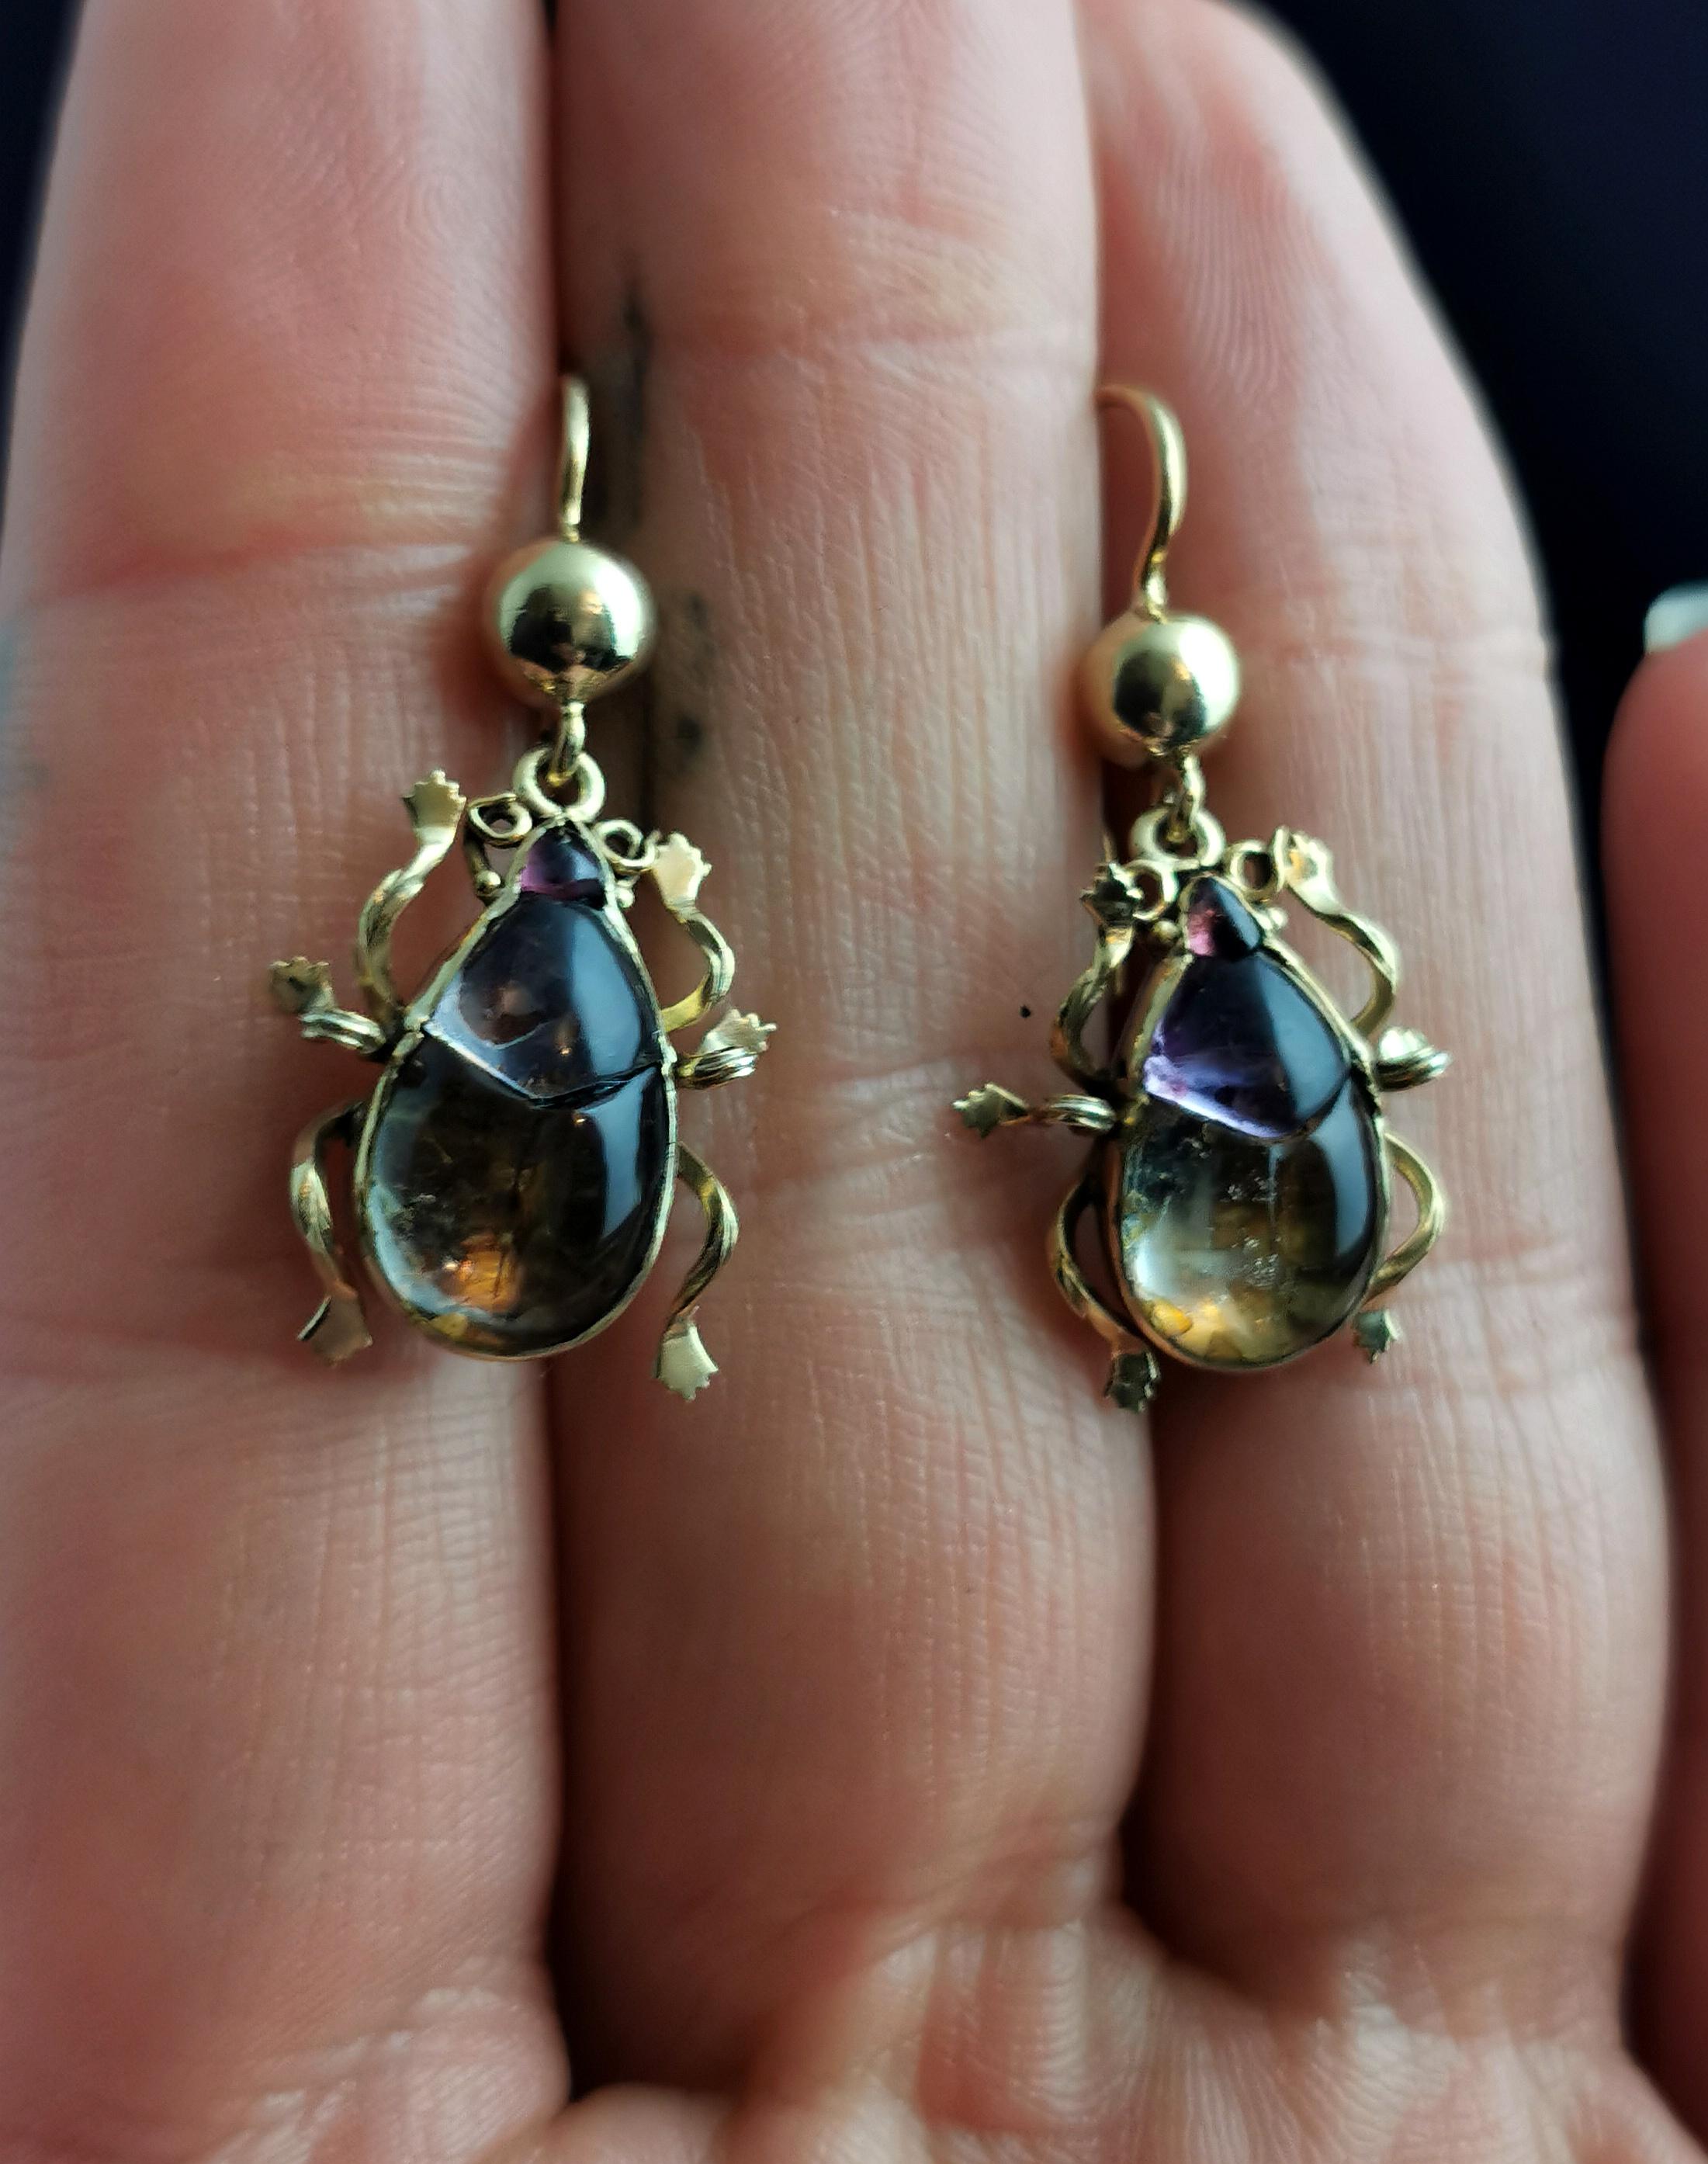 Cabochon Antique Victorian Beetle Earrings, 9k Gold, Egyptian Revival